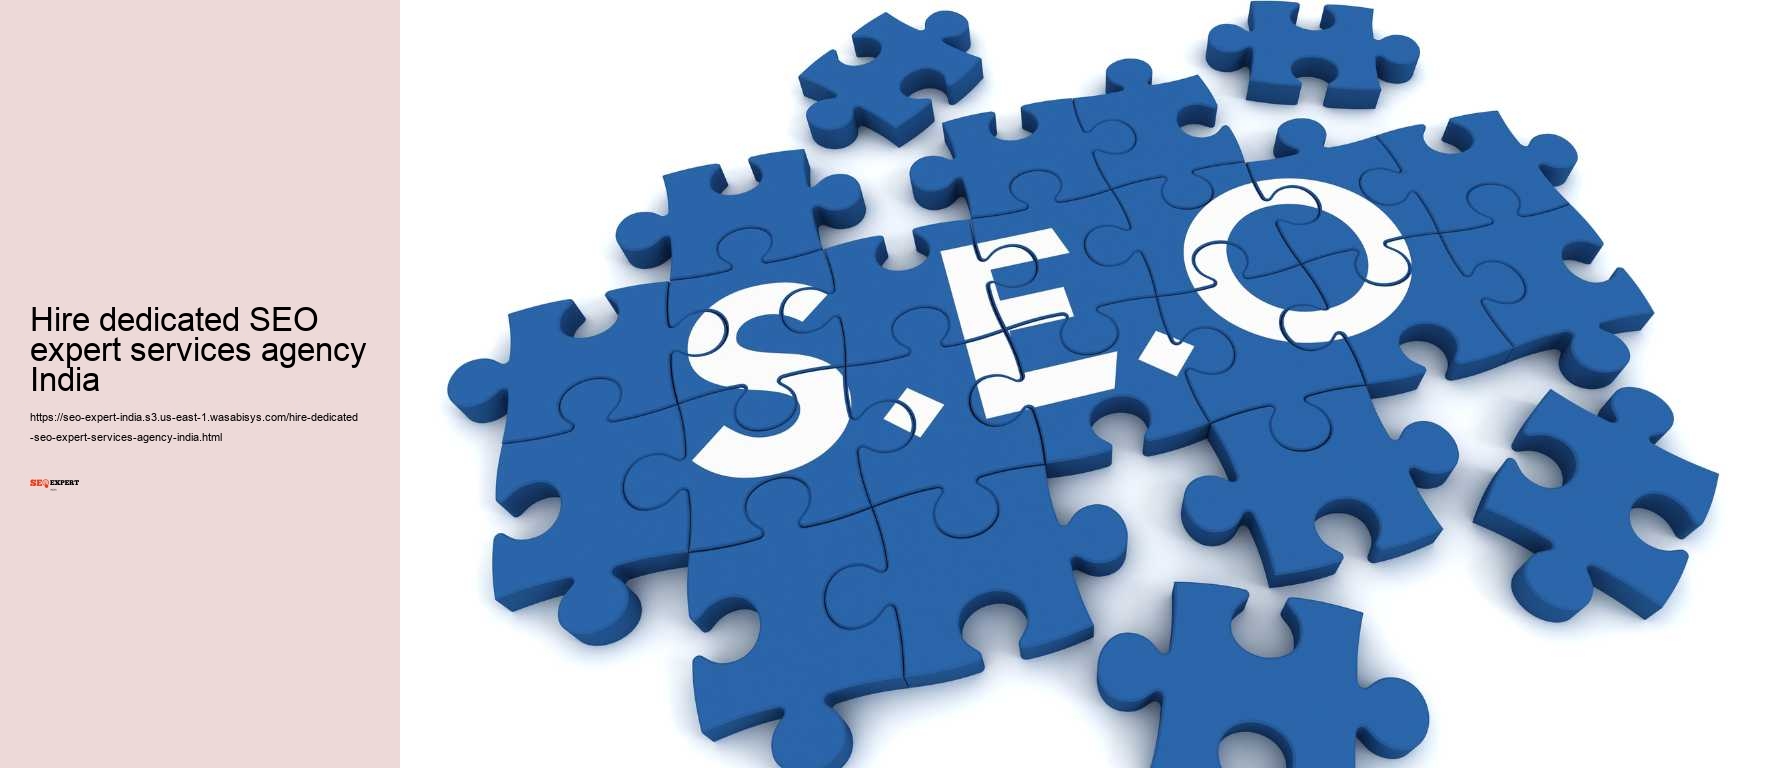 Hire dedicated SEO expert services agency India